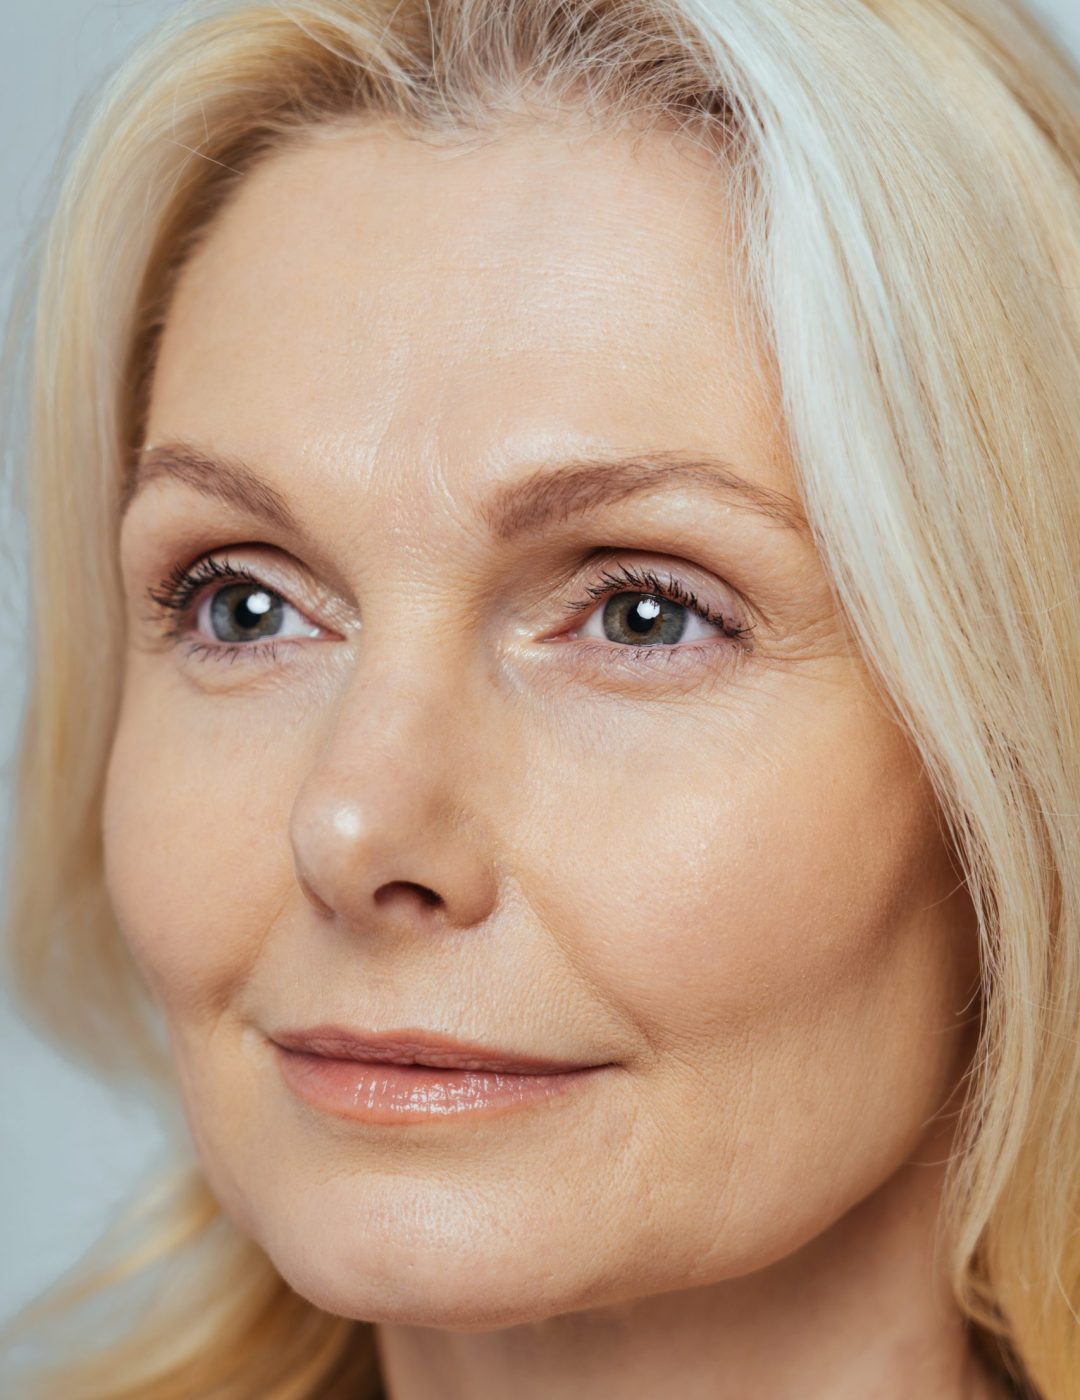 Profile view of older woman with defined cheek bones